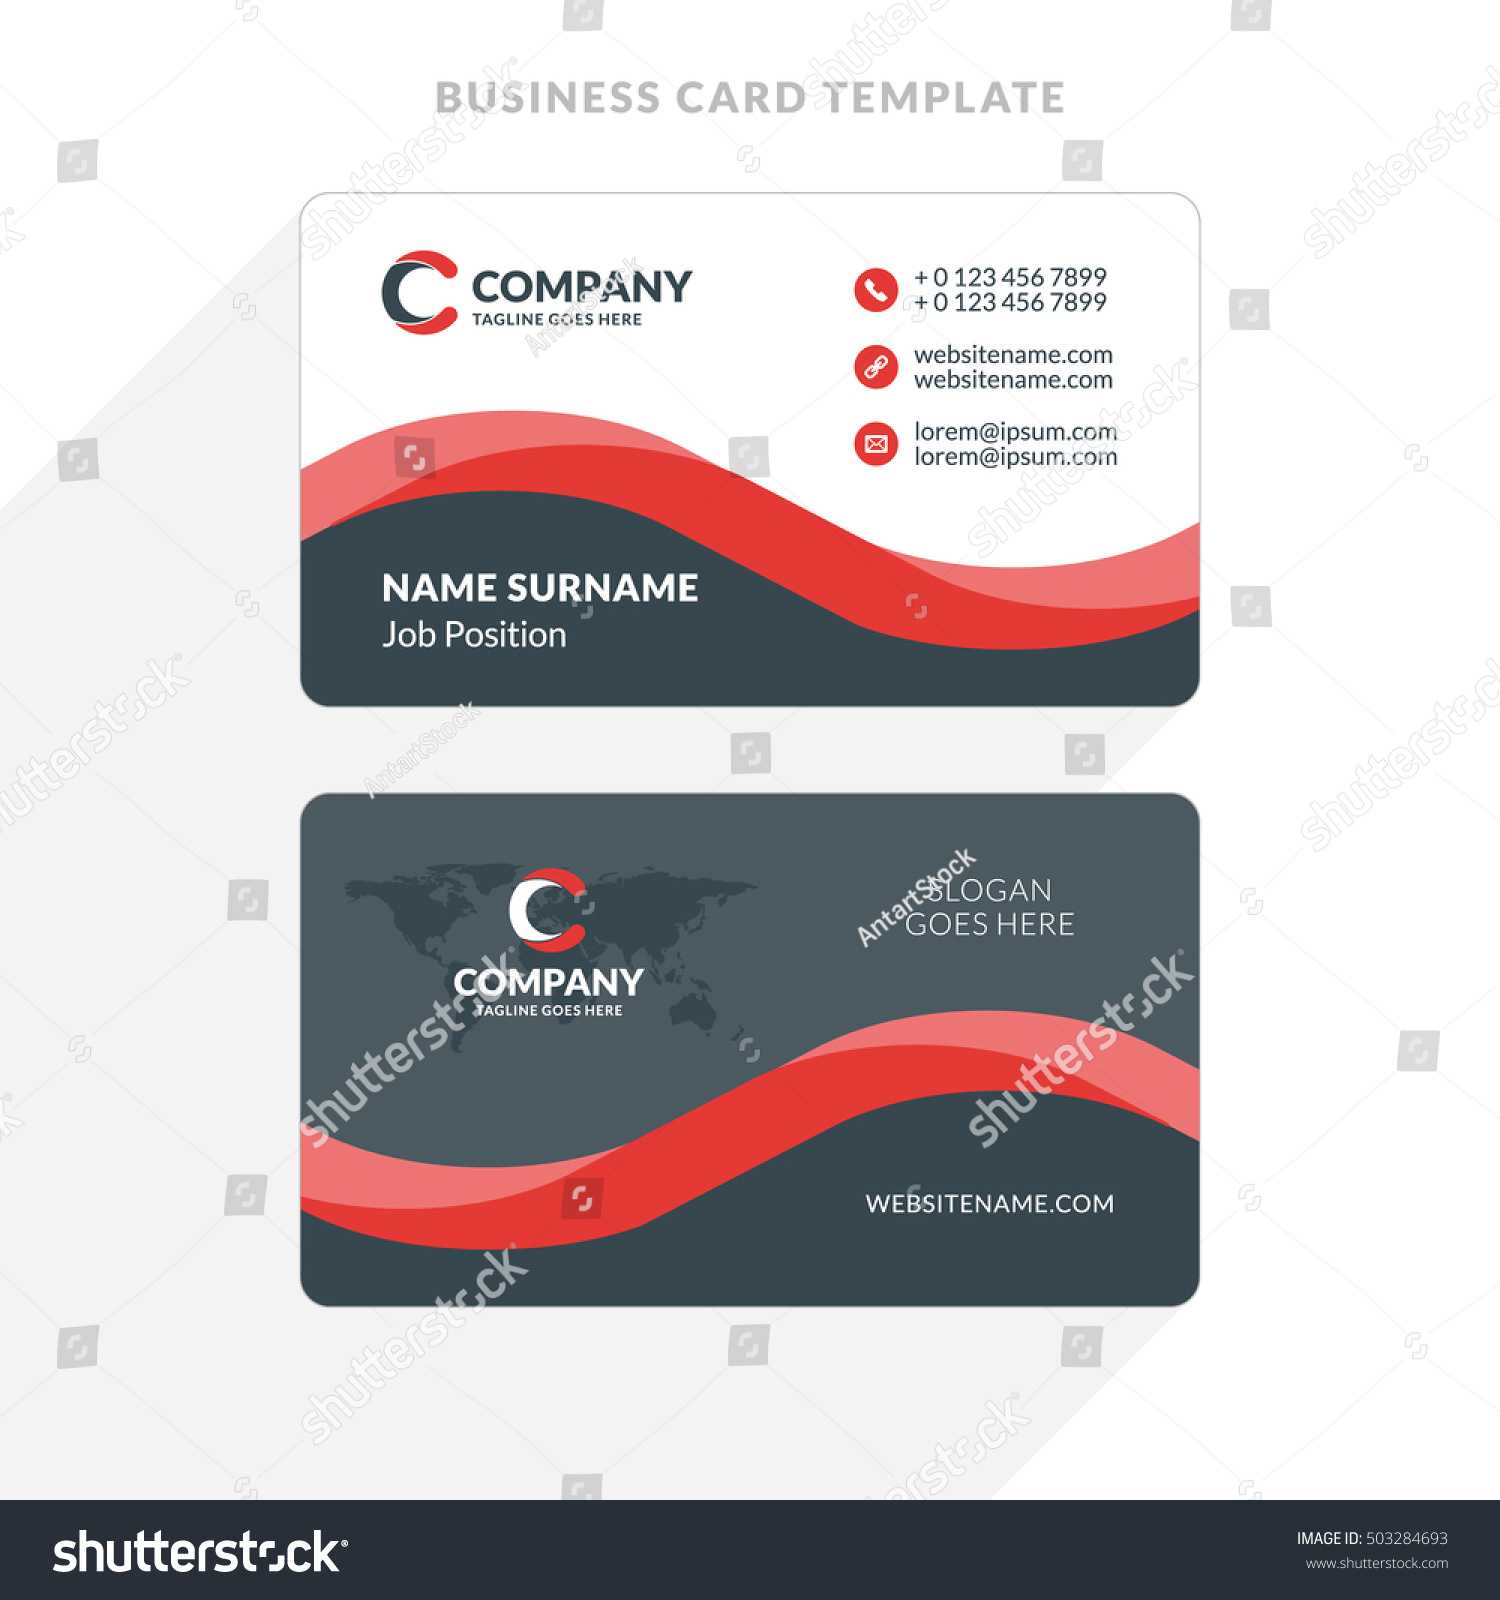 Double Sided Business Card Template Illustrator ] – Adobe Throughout Double Sided Business Card Template Illustrator